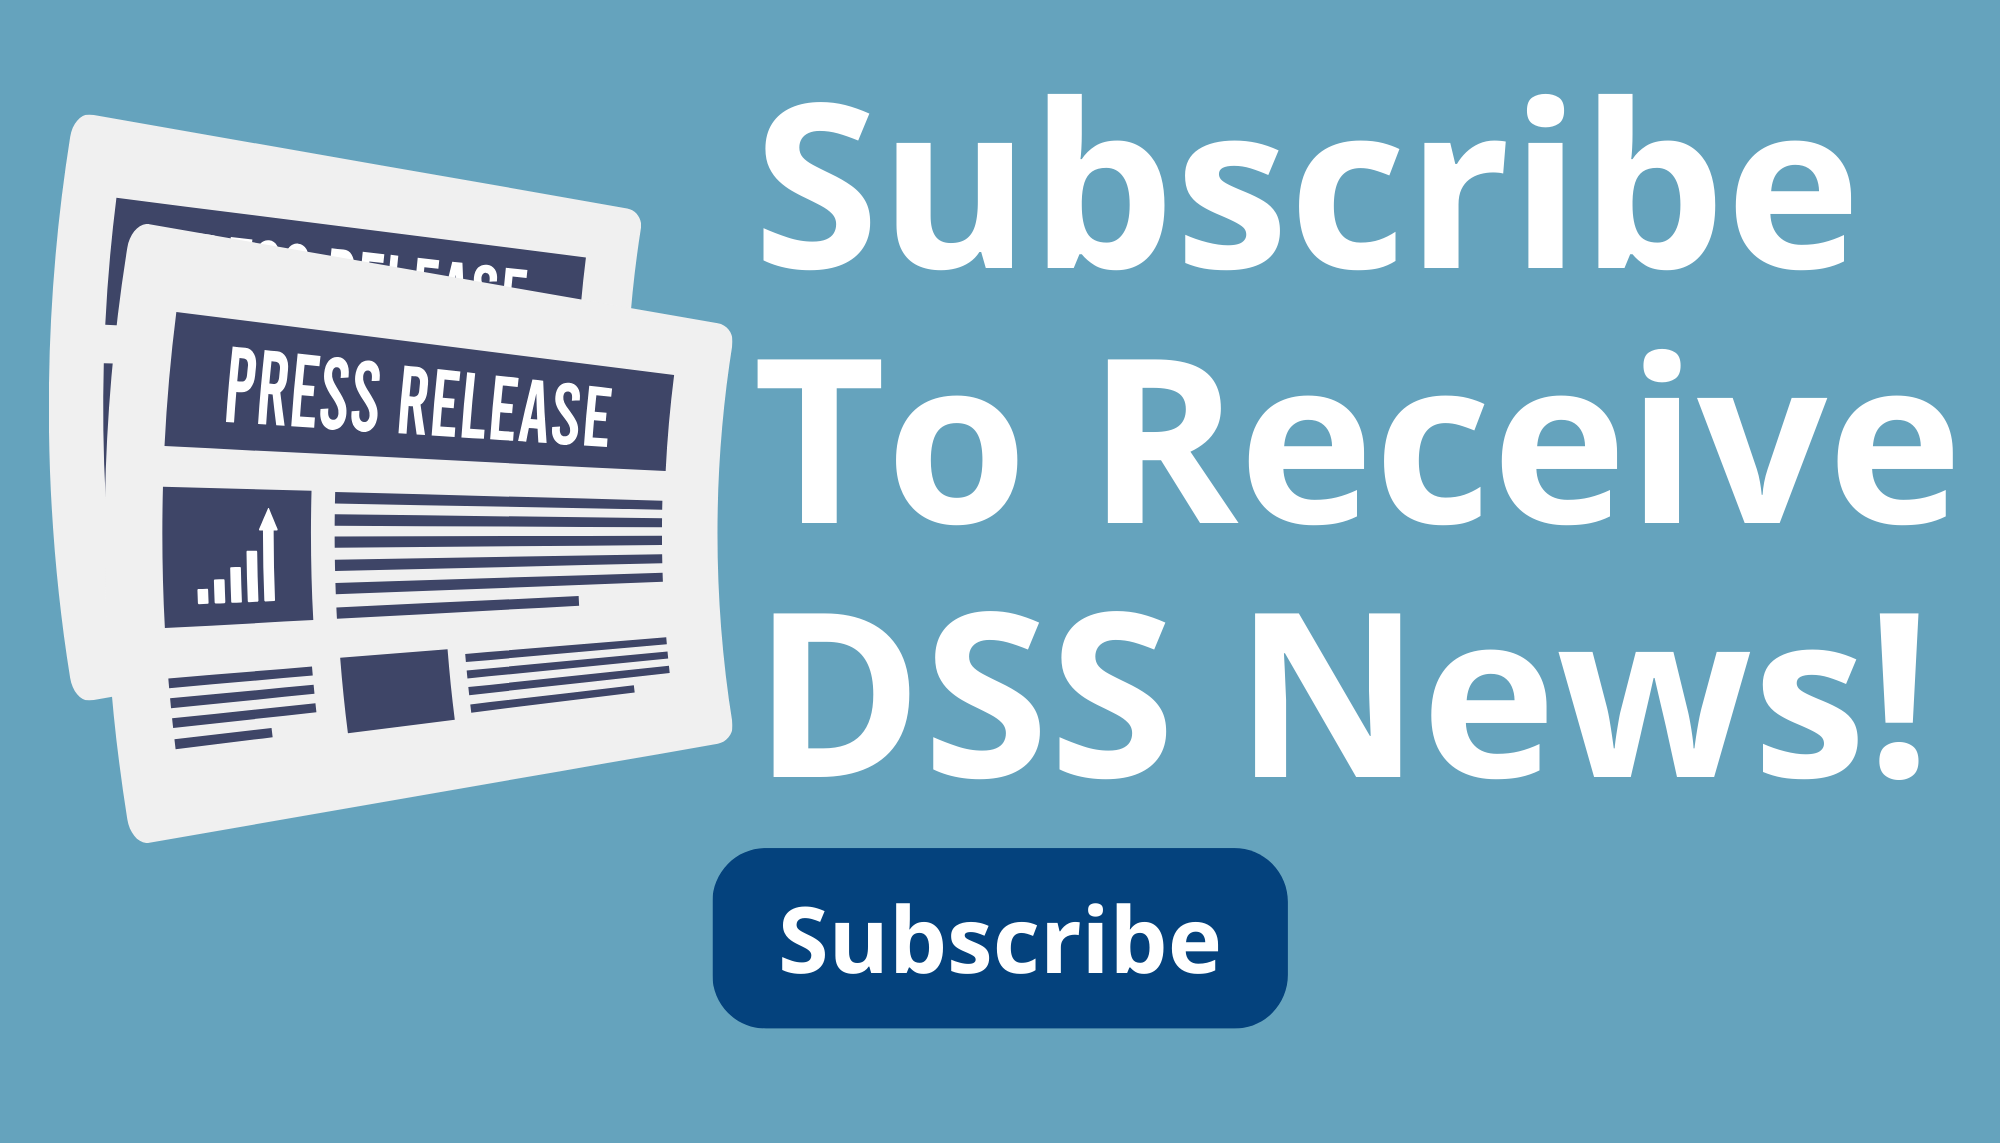 Subscribe to receive DSS News